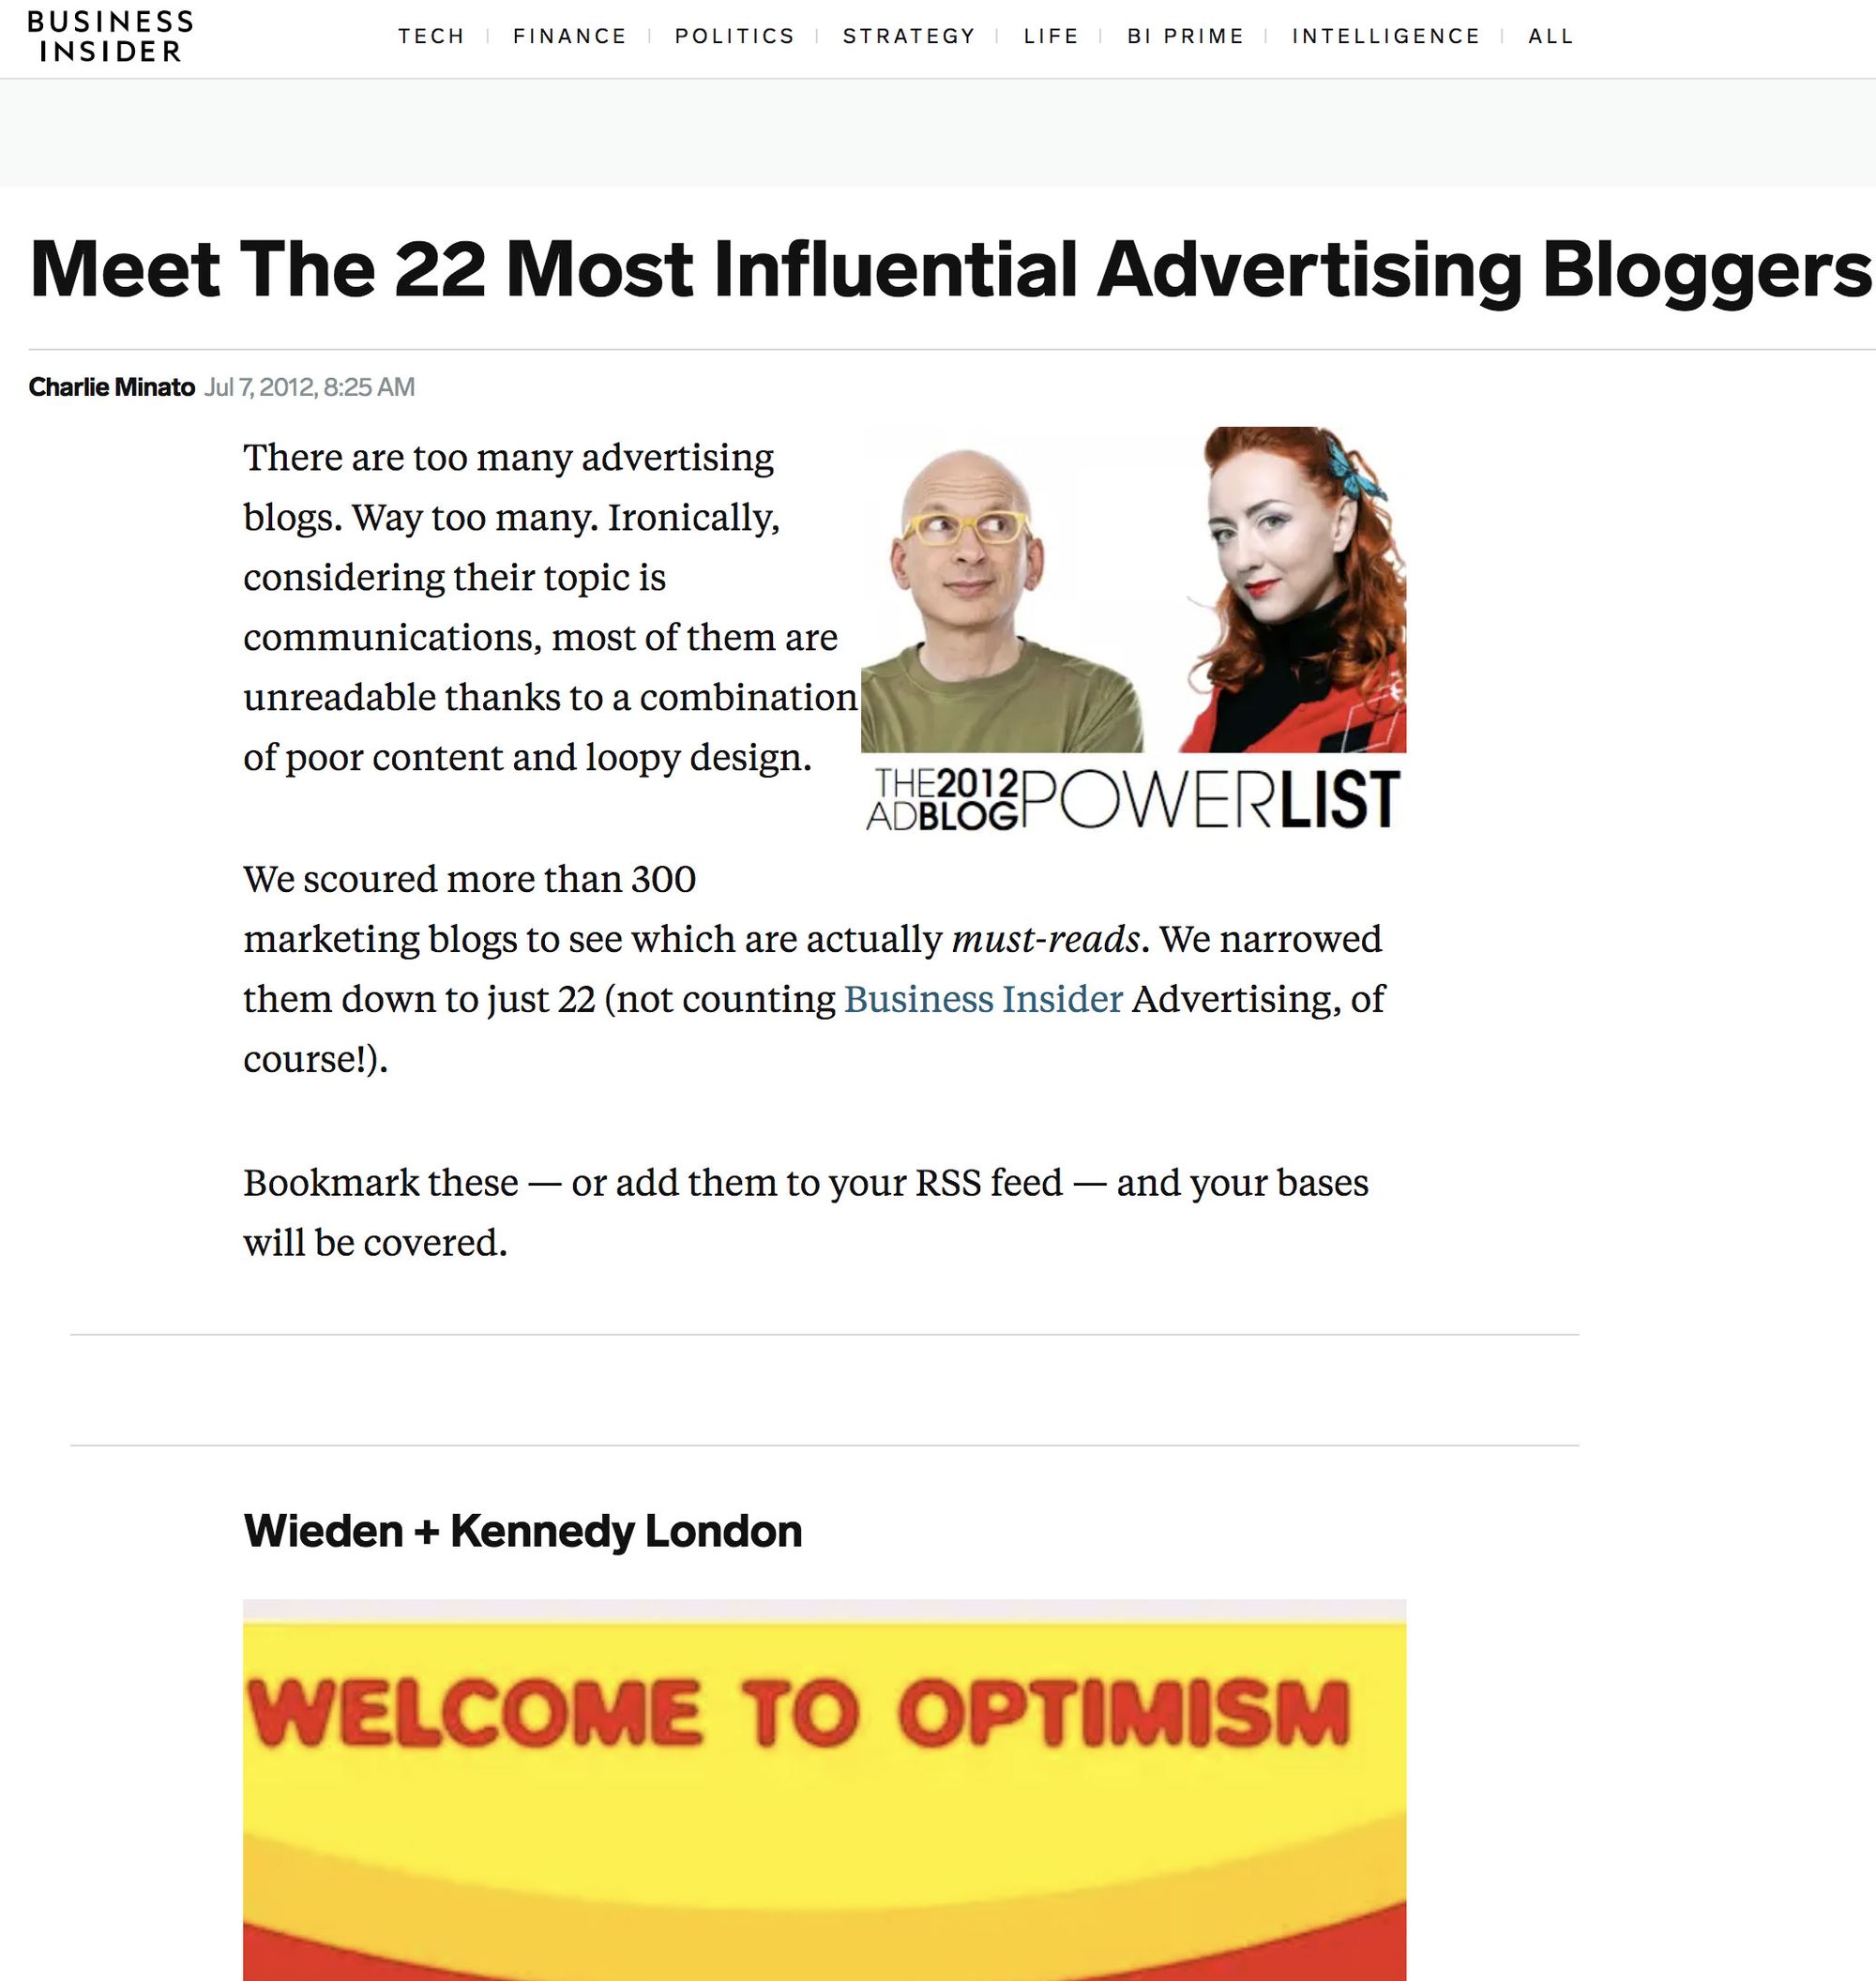 Meet The 22 Most Influential Advertising Bloggers